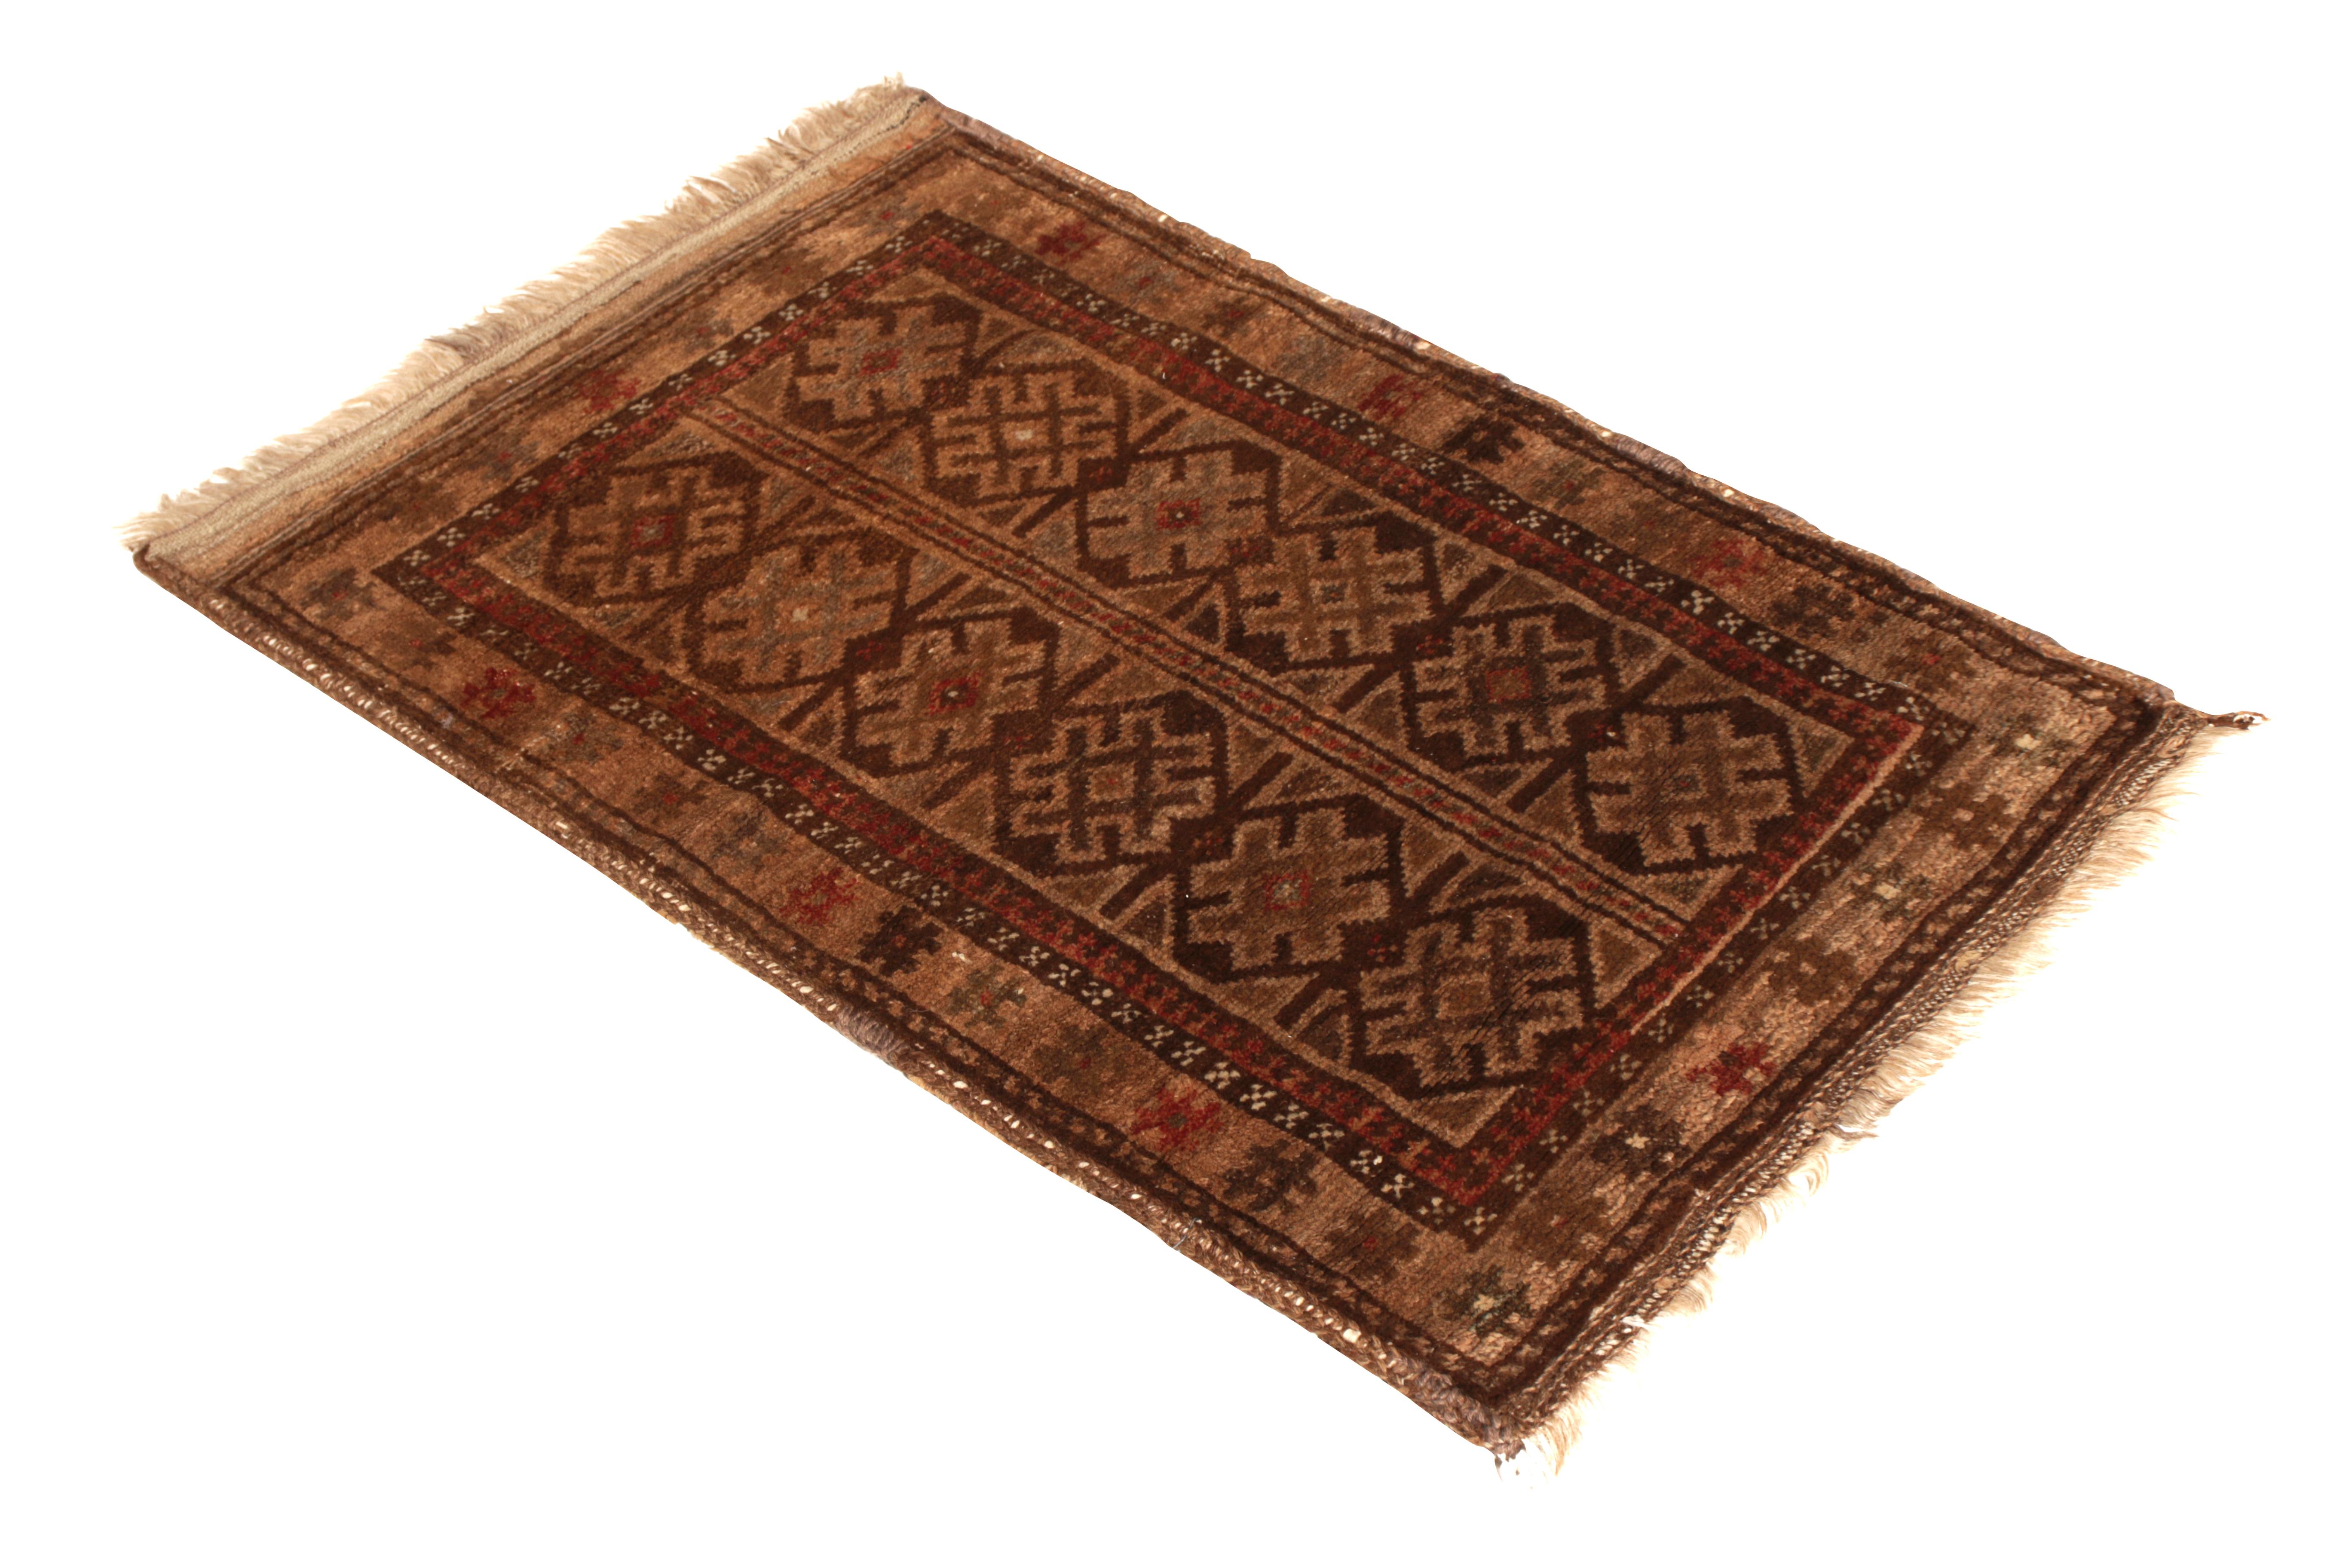 Originating from Persia in 1880, this hand knotted Baluch Persian wool rug enjoys both the iconic features of its tribal family as well as intriguing departures from tradition. As many Baluch pieces were known to repeat geometric tribal motifs like